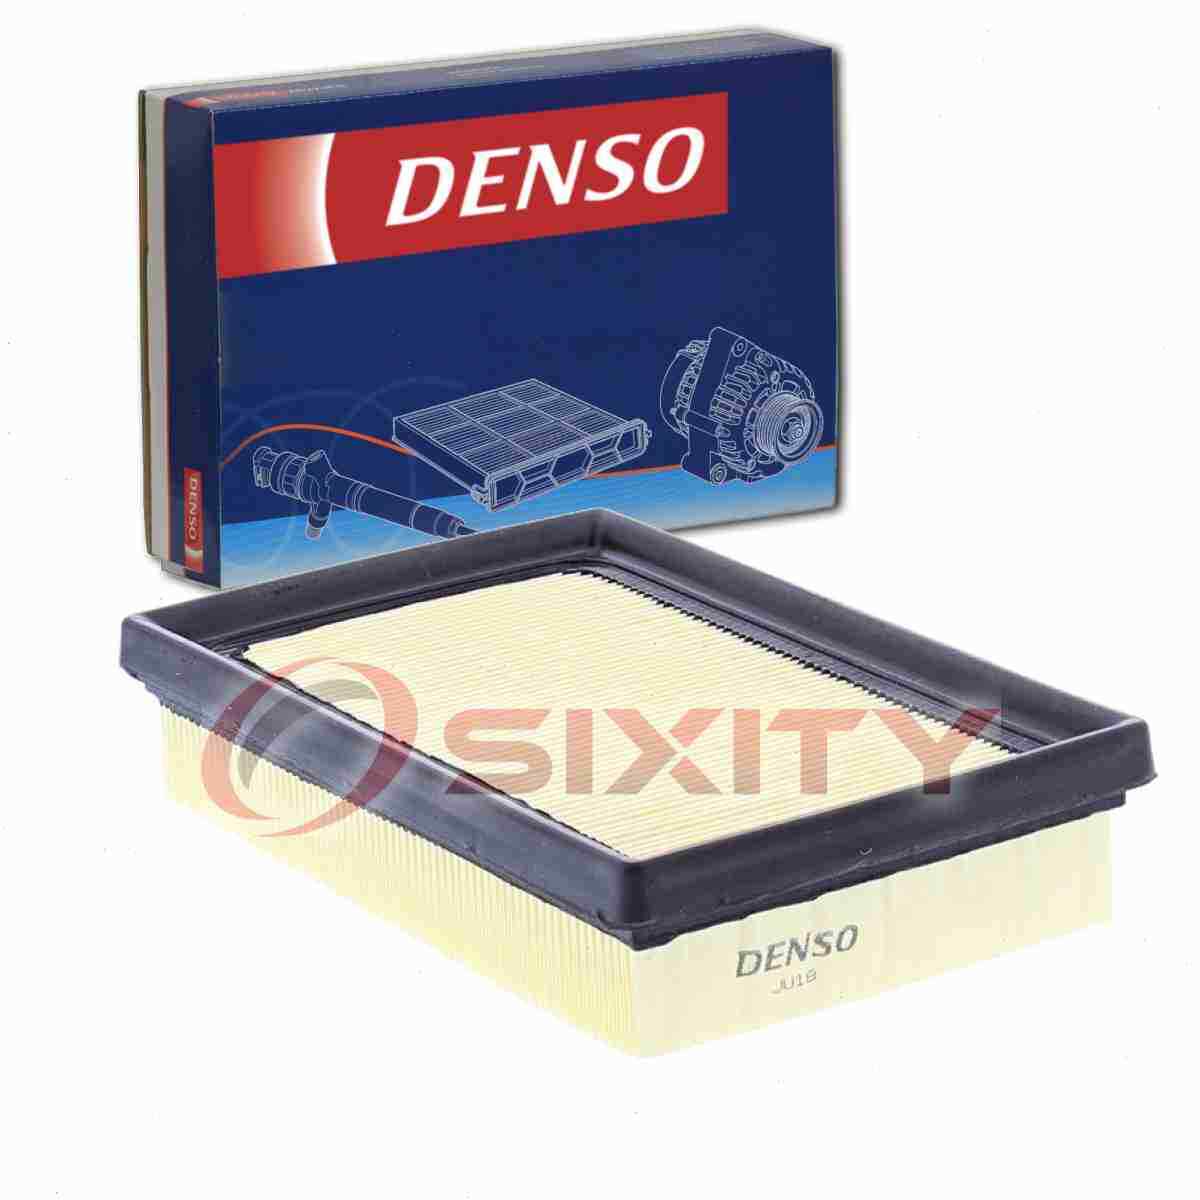 DENSO 143-3650 Air Filter for WA10000 CA11426 AF5216 17801-21060 Intake gs